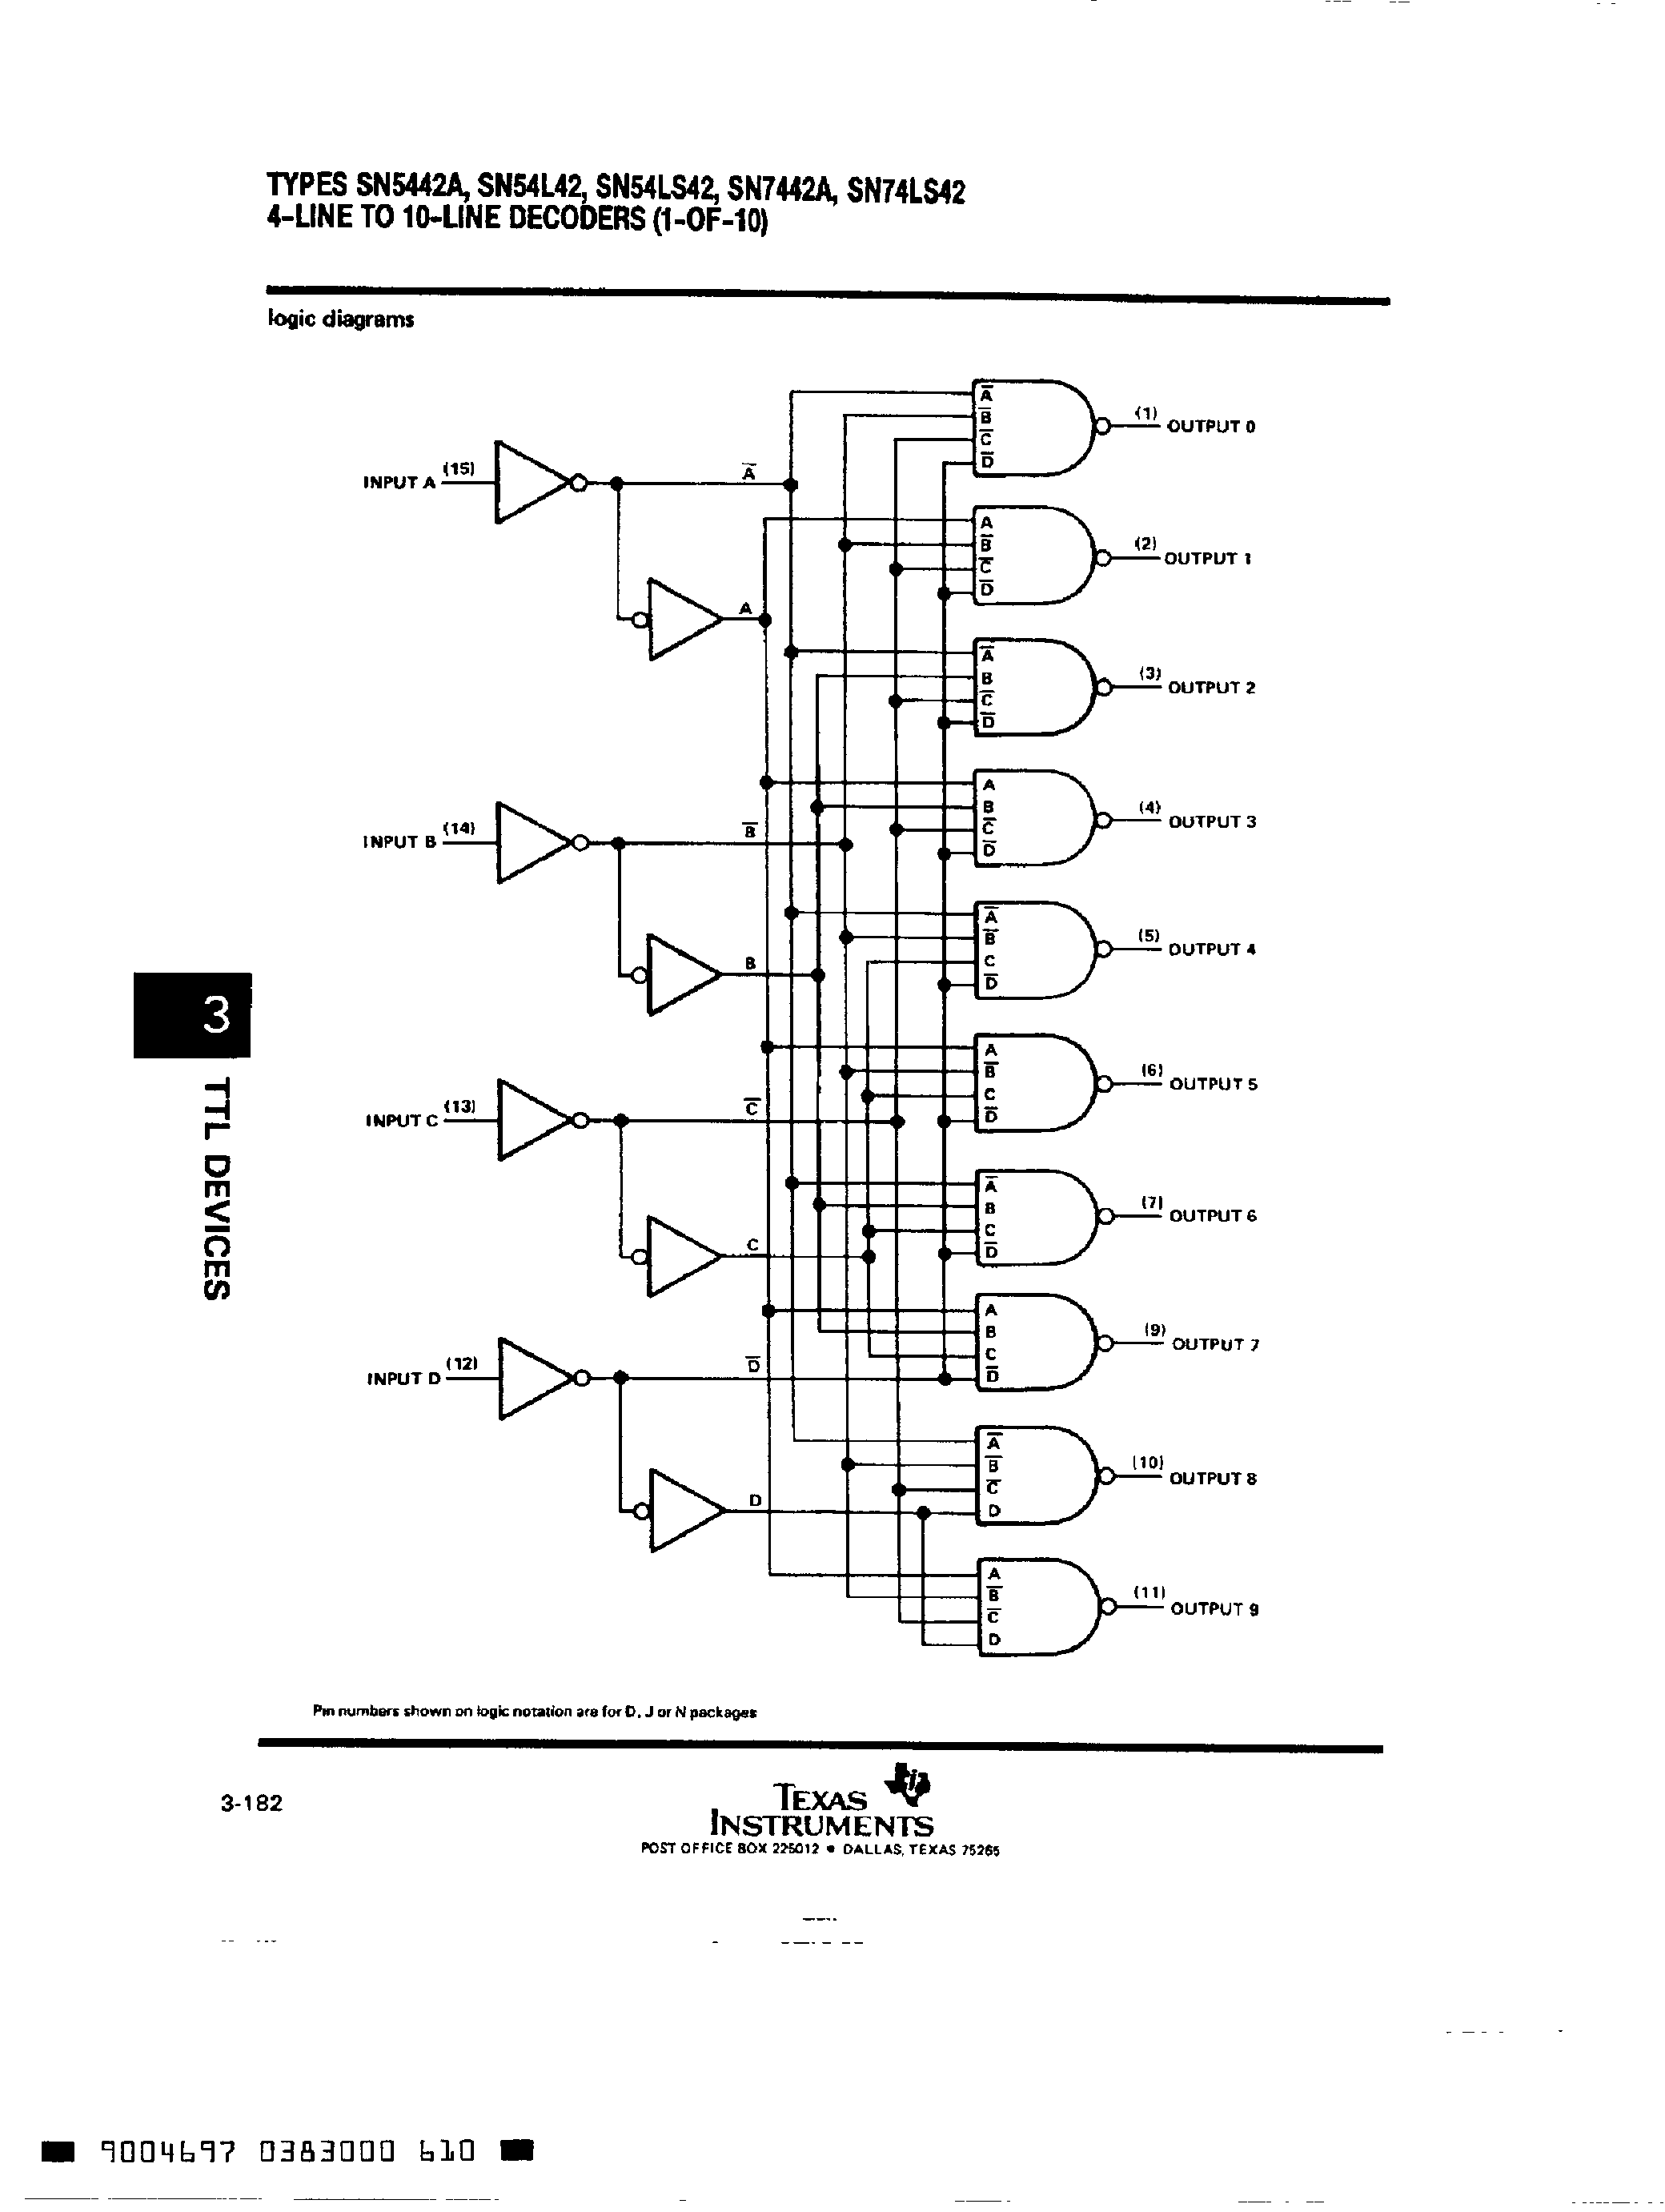 Datasheet SN7443 - 4 Line to 10 Line Decoders page 2